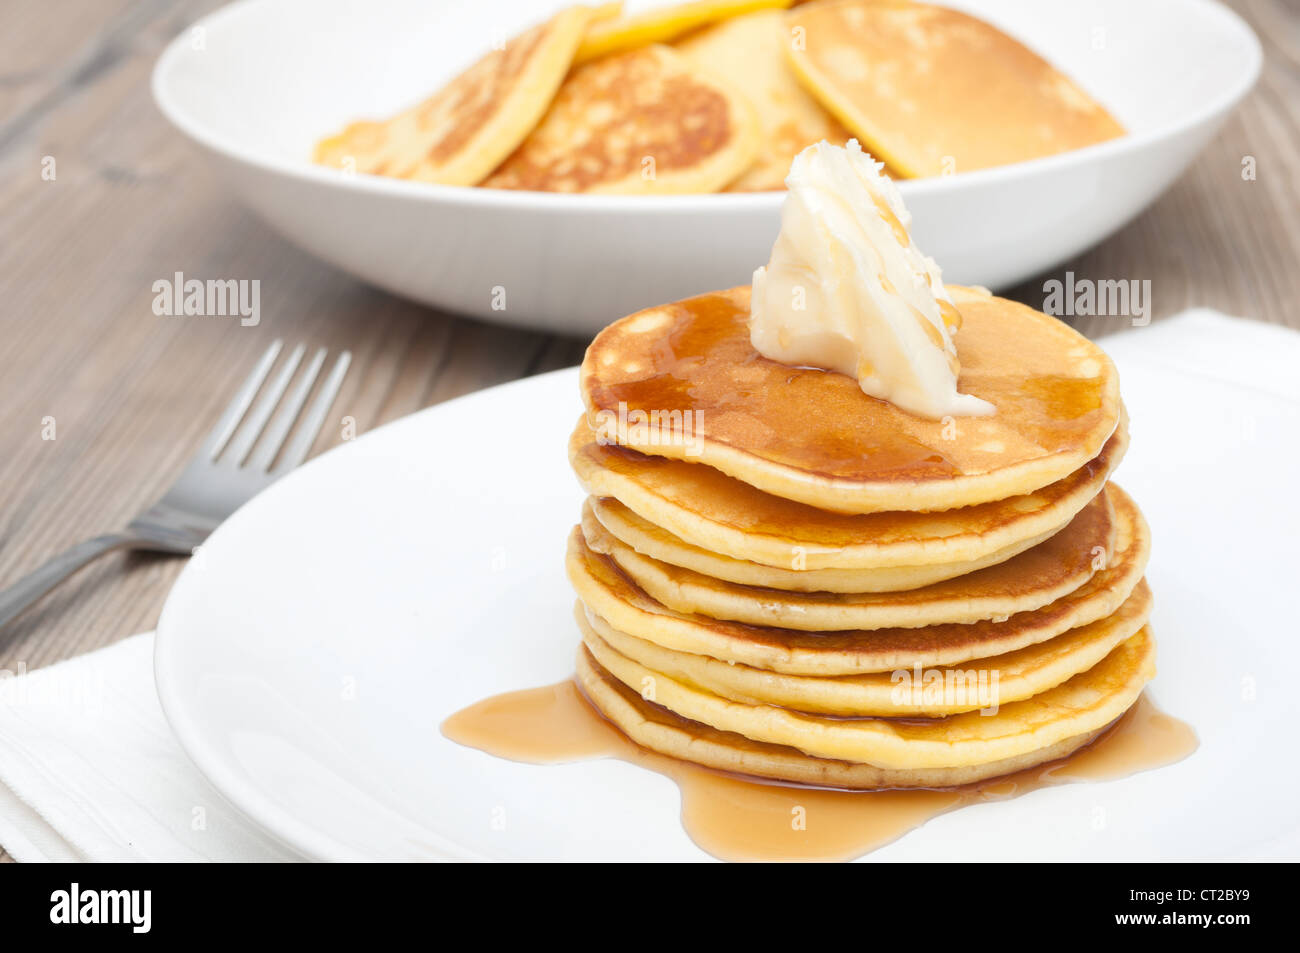 Homemade Pancakes With Butter and Warm Maple Syrup Stock Photo